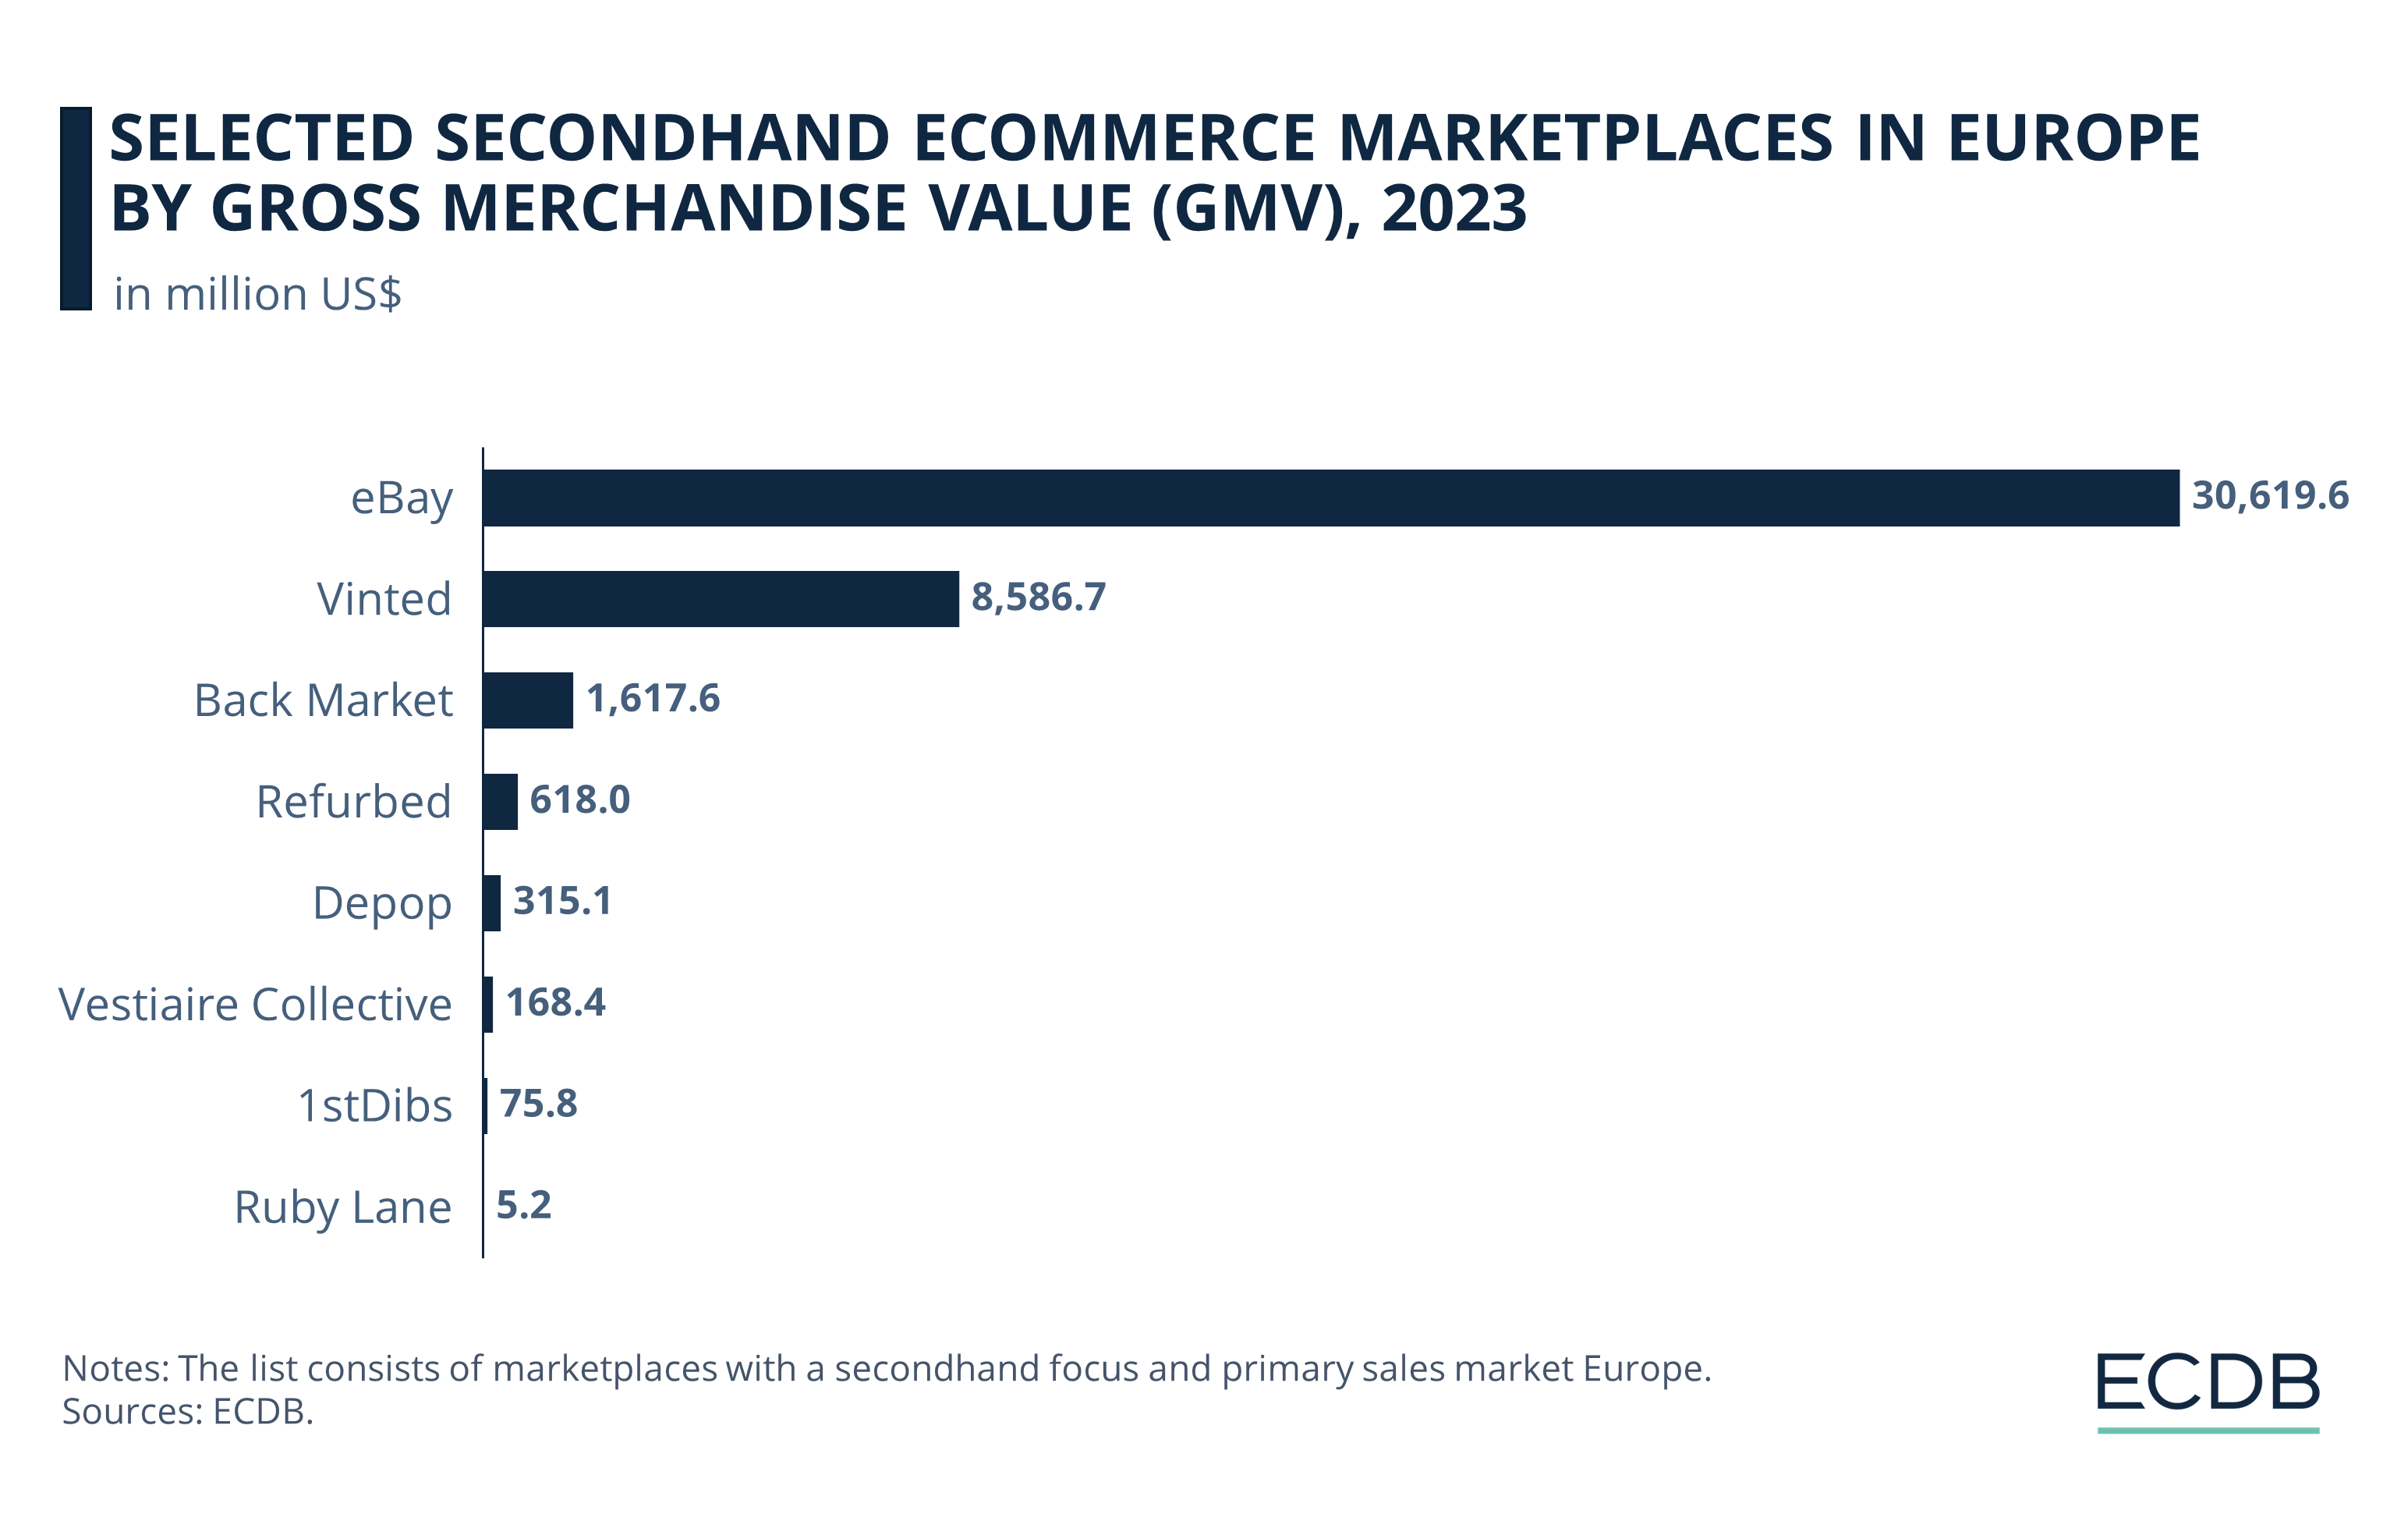 Selected Secondhand eCommerce Marketplaces in Europe by GMV, 2023